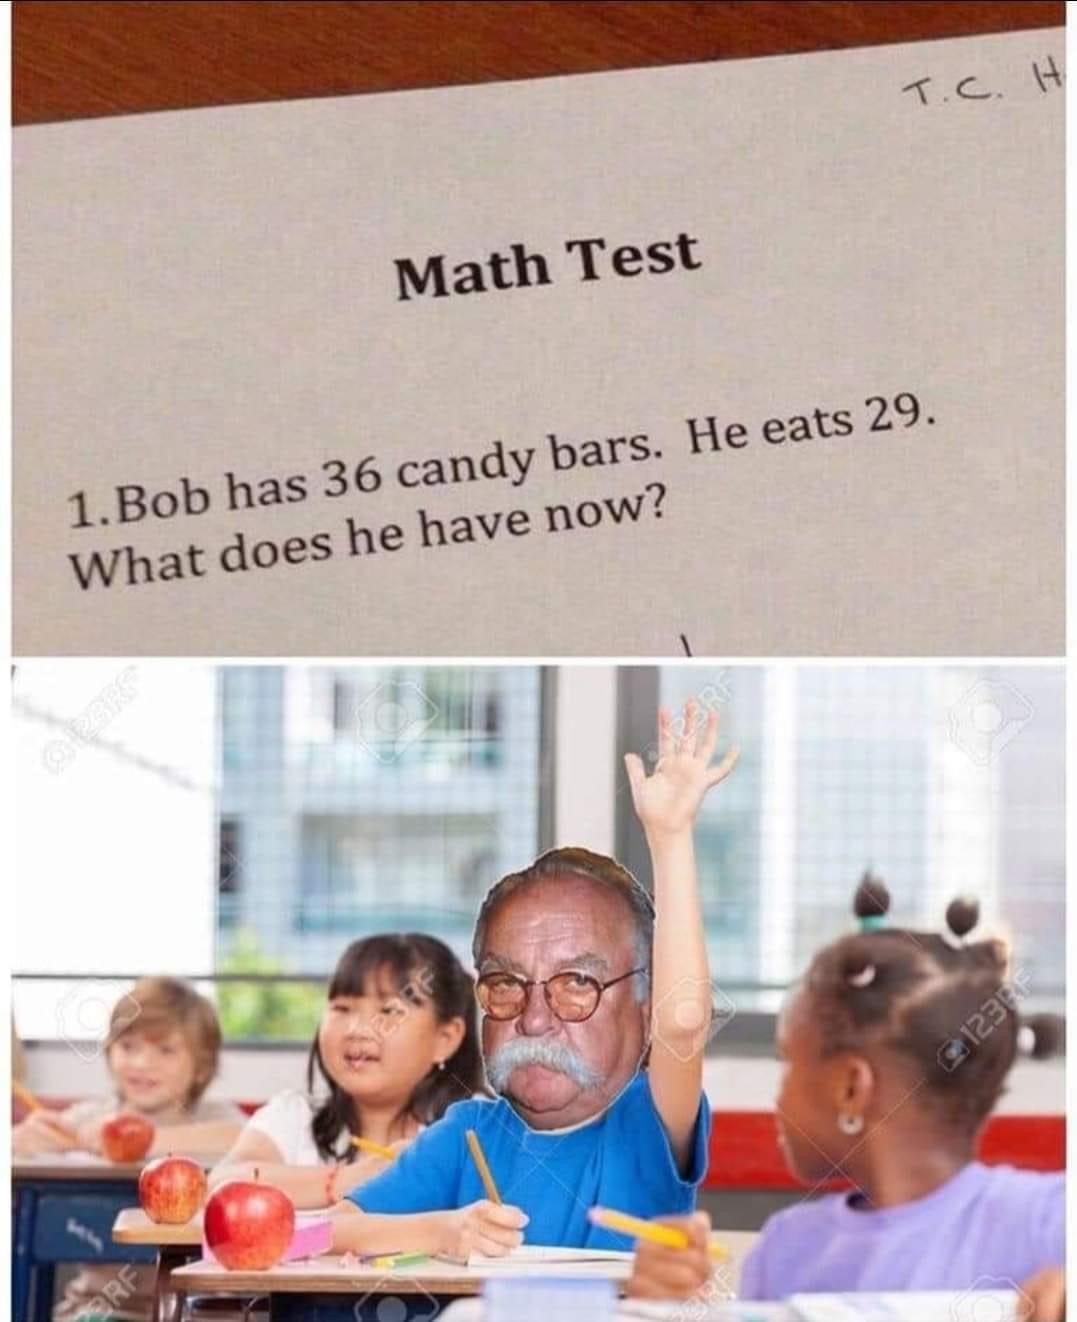 wilford brimley meme - T.C. H Math Test 1. Bob has 36 candy bars. He eats 29. What does he have now? 123